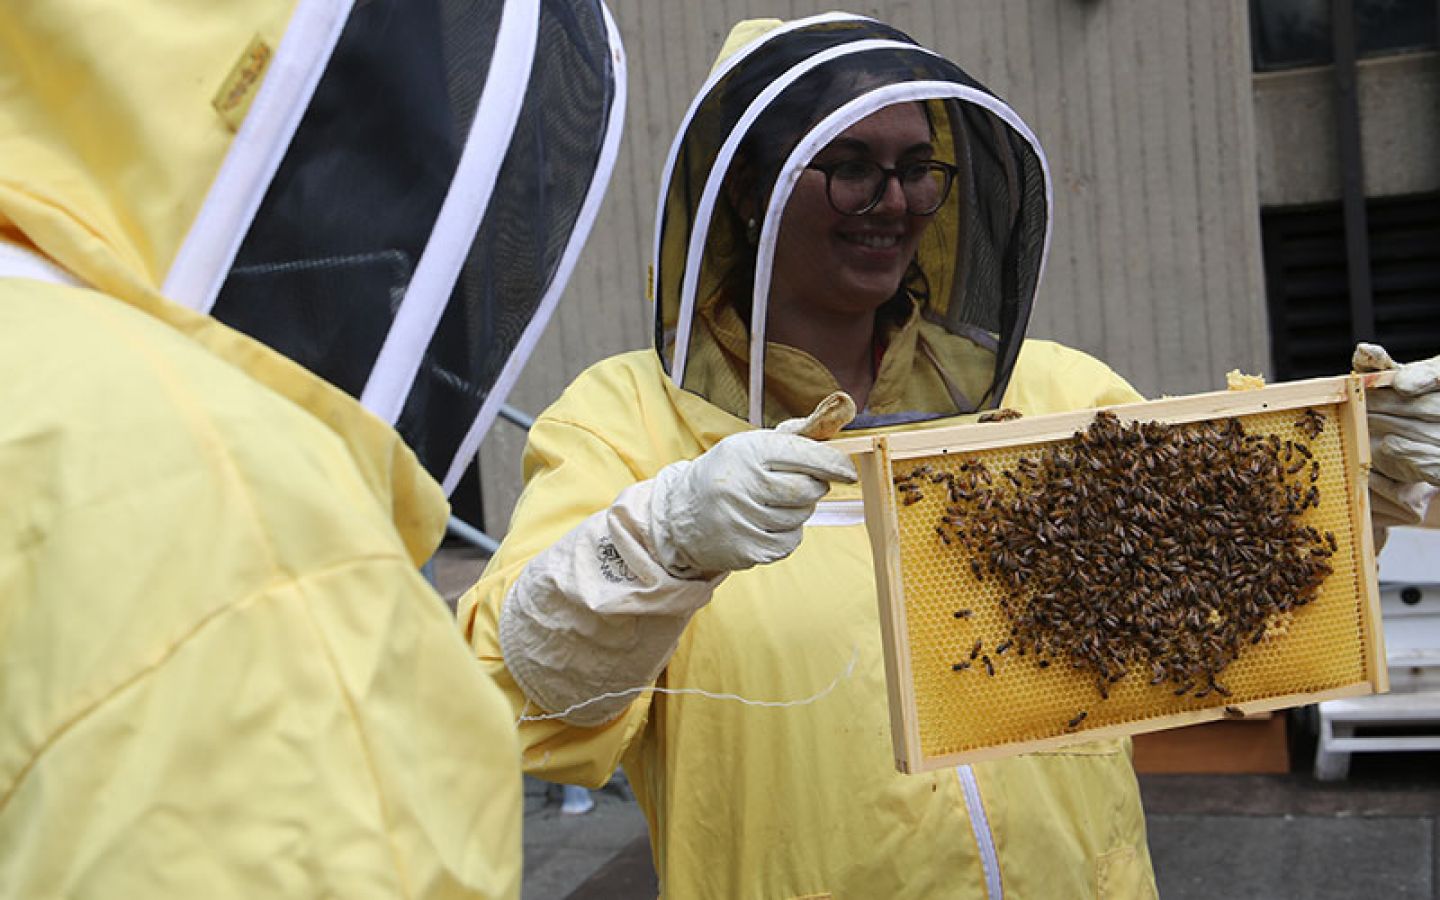 City staff member holds a honey super frame covered in bees